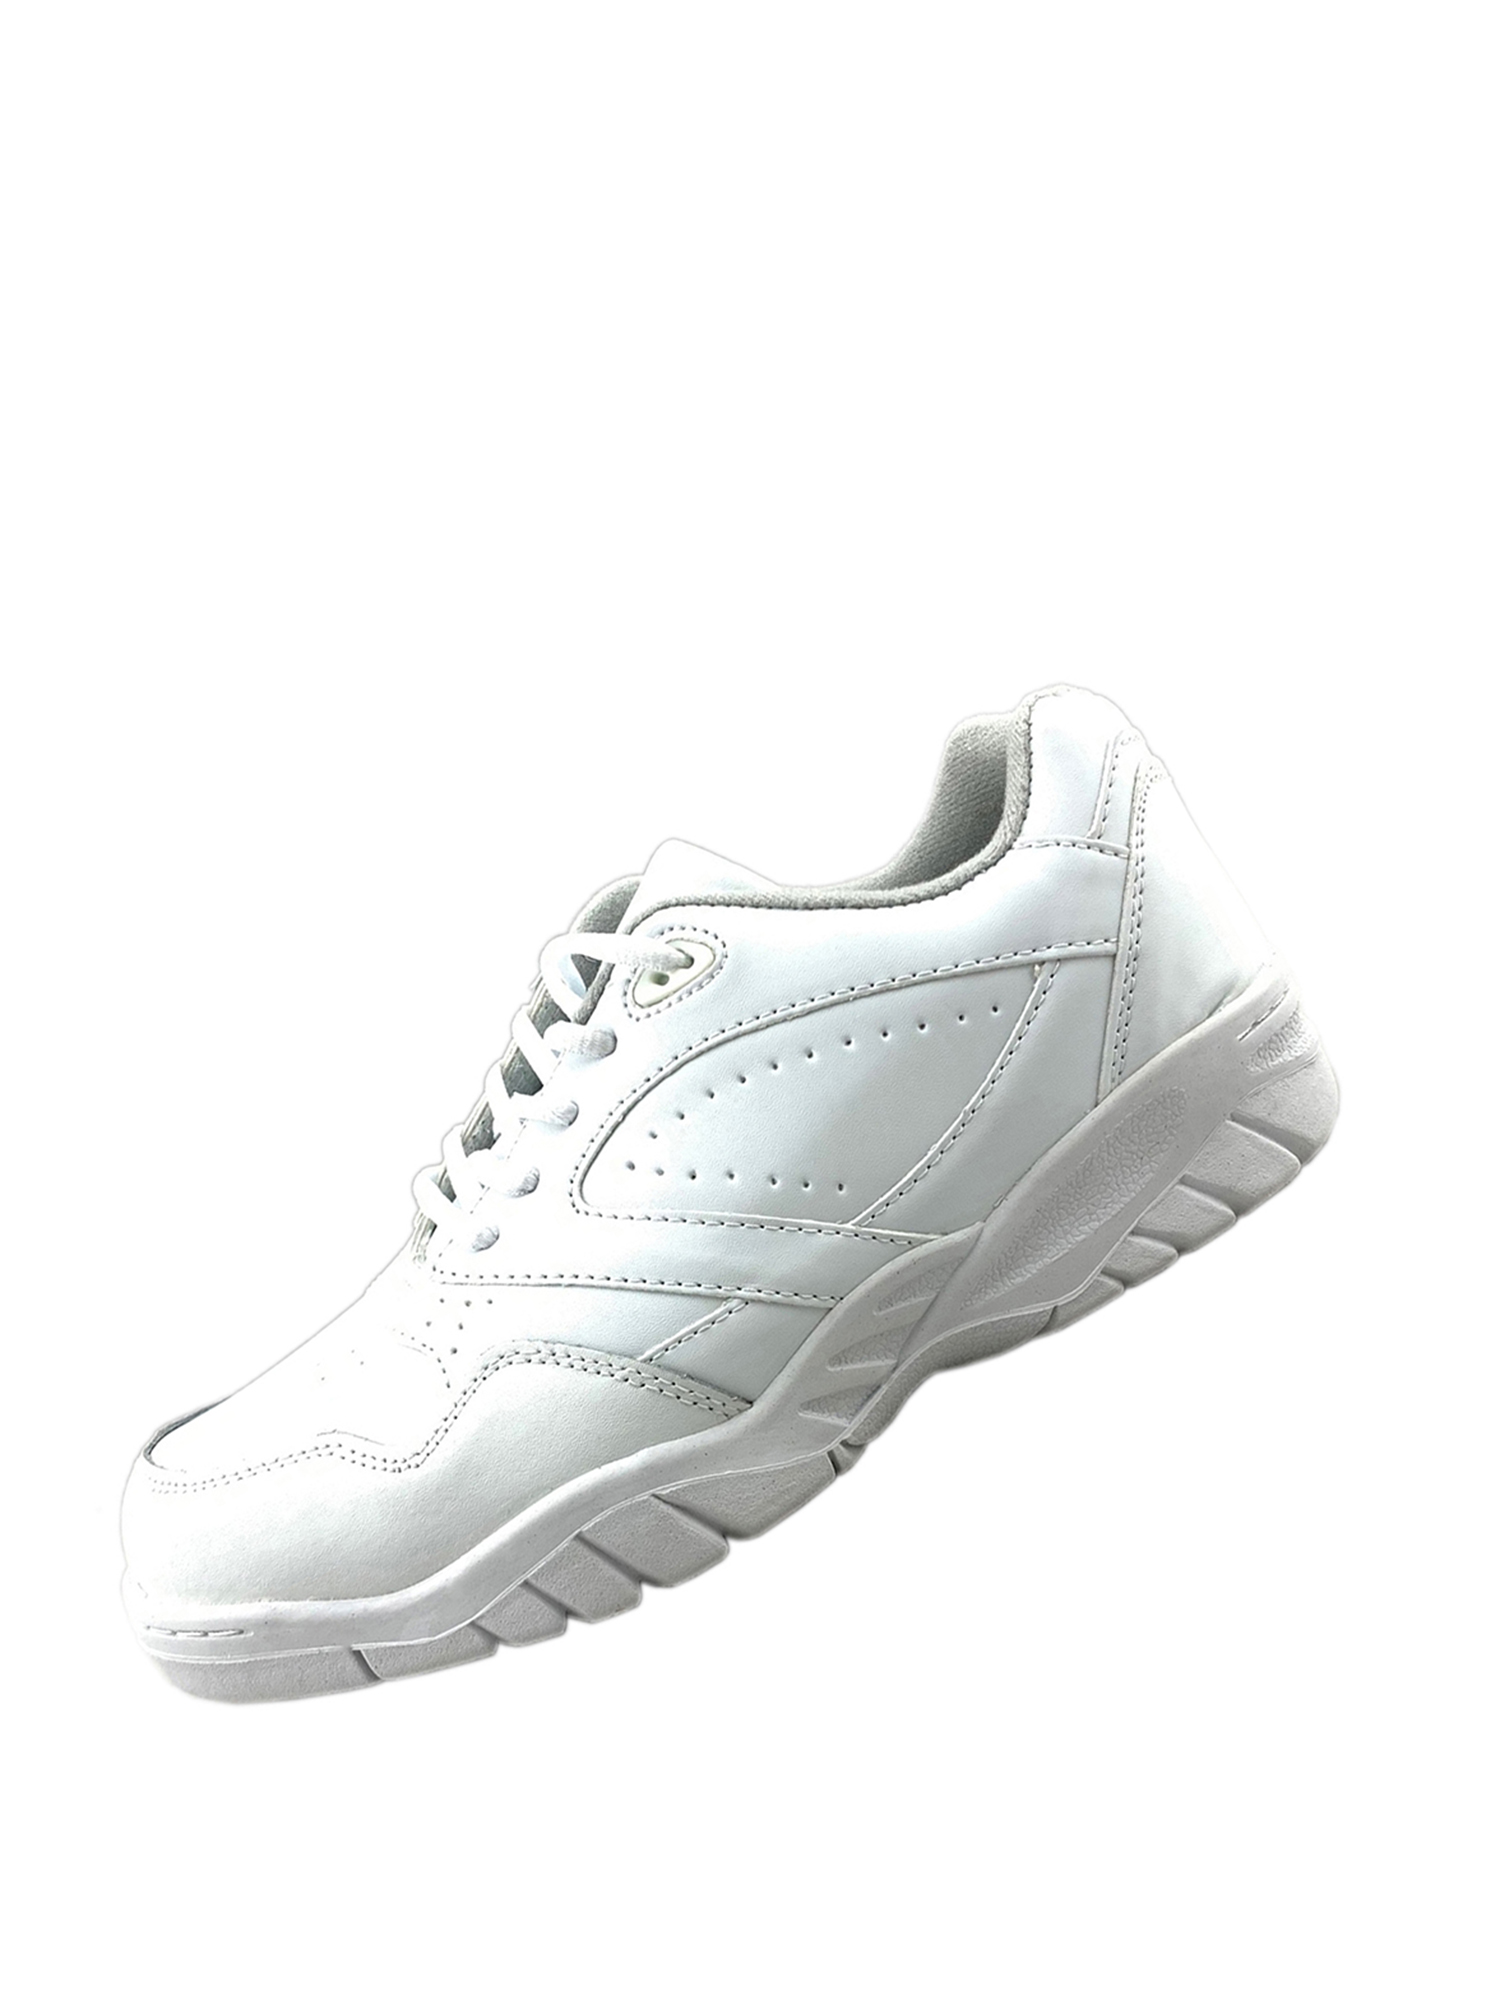 Tanleewa Men's Leather Sneakers Non-Slip Sports Shoes Lightweight Tennis Shoe Size 9 - image 1 of 5